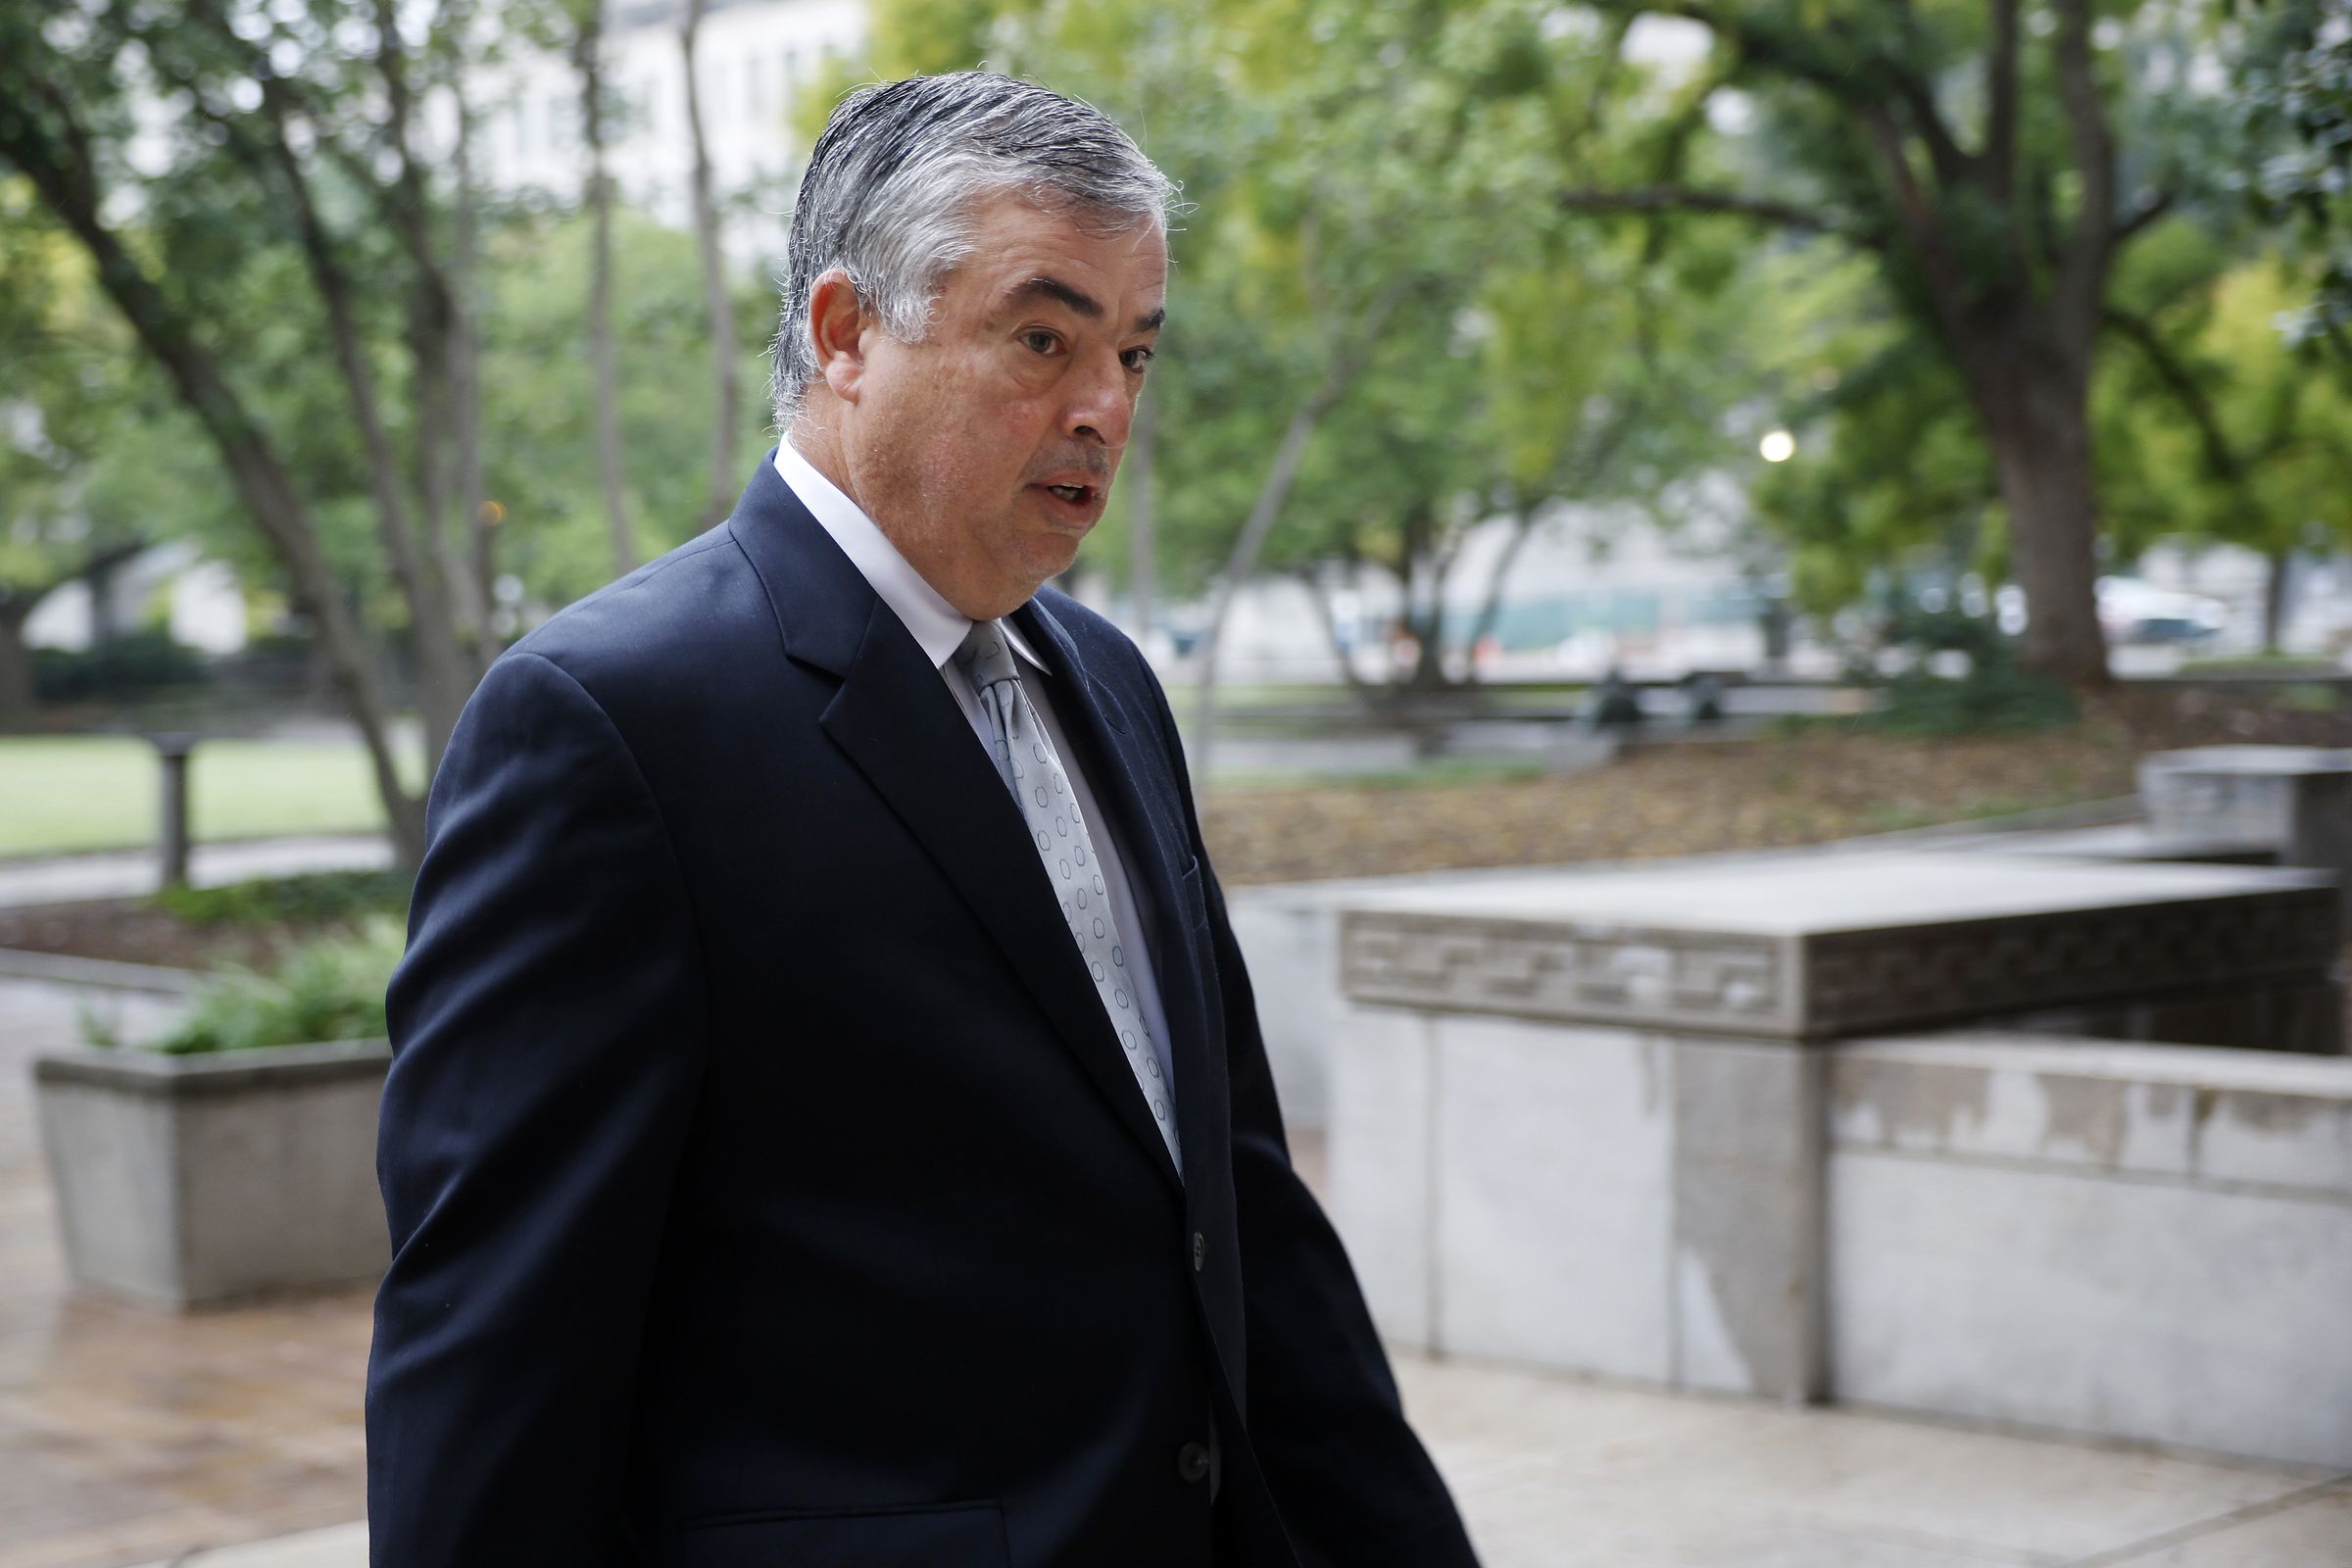 Apple Executive Eddy Cue To Testify In Government’s Case Against Google In D.C.